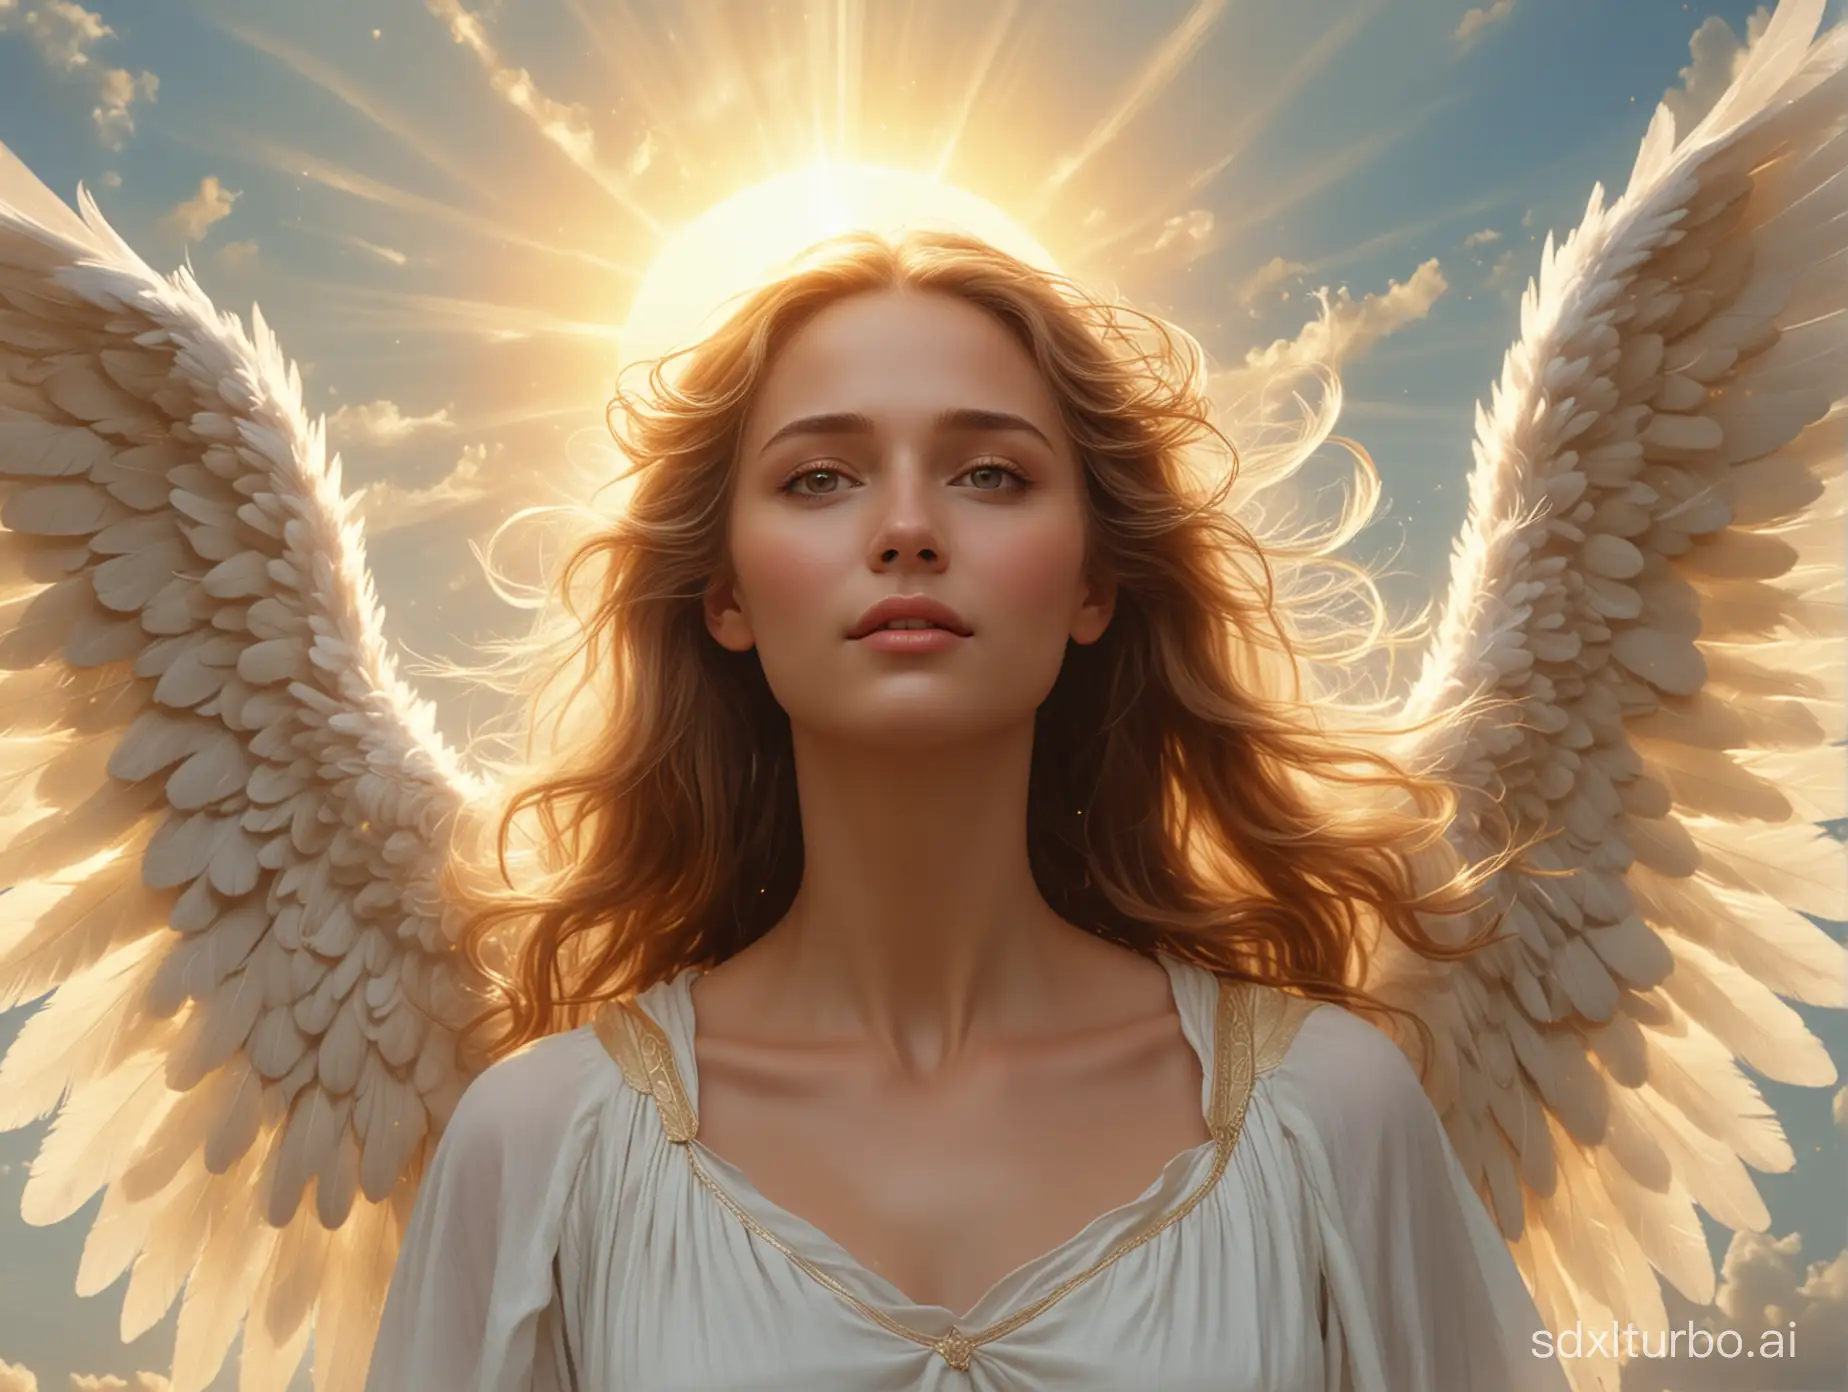 Woman, an ethereal angel Gabriel, divine light. The sky was clear, the golden wings were spread, and there was a glowing halo overhead. Beautiful facial features, in a beautiful and majestic atmosphere. Realistic movie poster style.